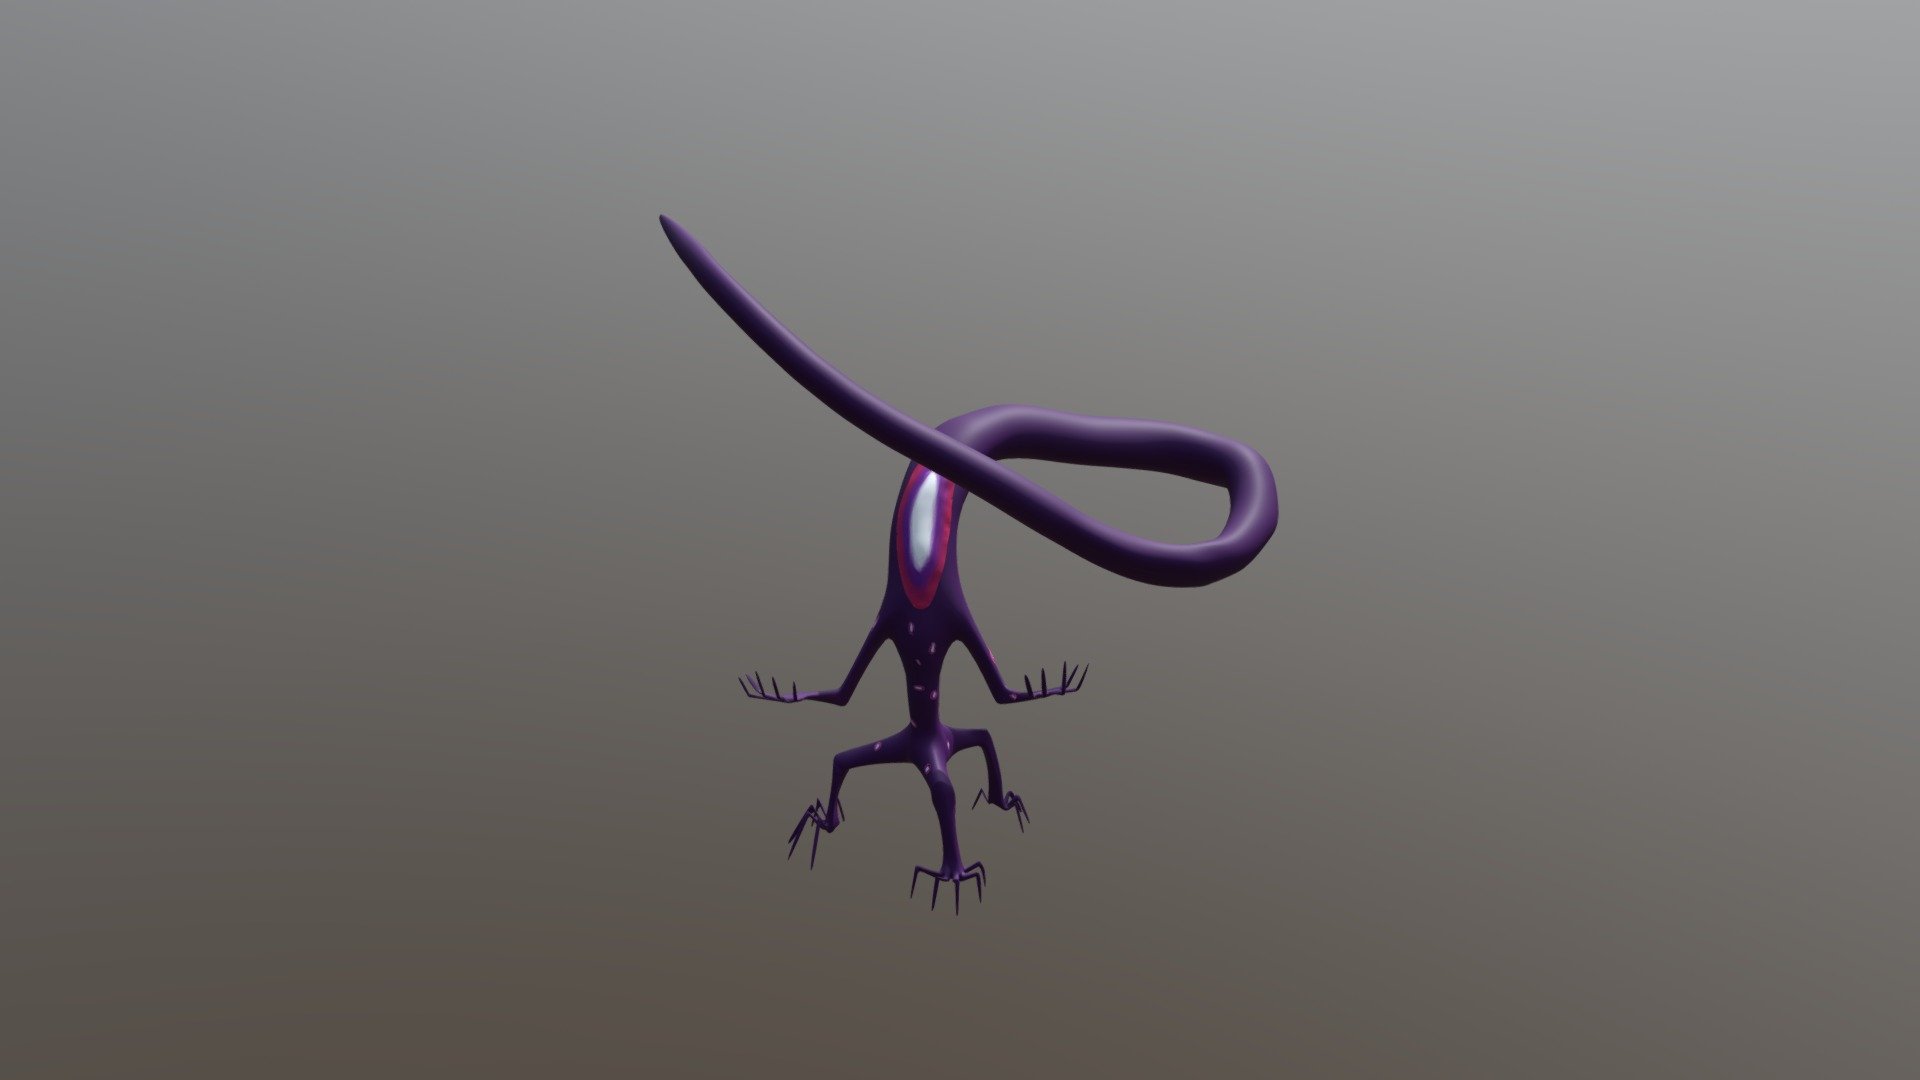 Nyarlathotep is a character in the works of H. P. Lovecraft and other writers. The character is commonly known in association with its role as a malign deity in the Lovecraft Mythos fictional universe, where it is known as the Crawling Chaos 3d model